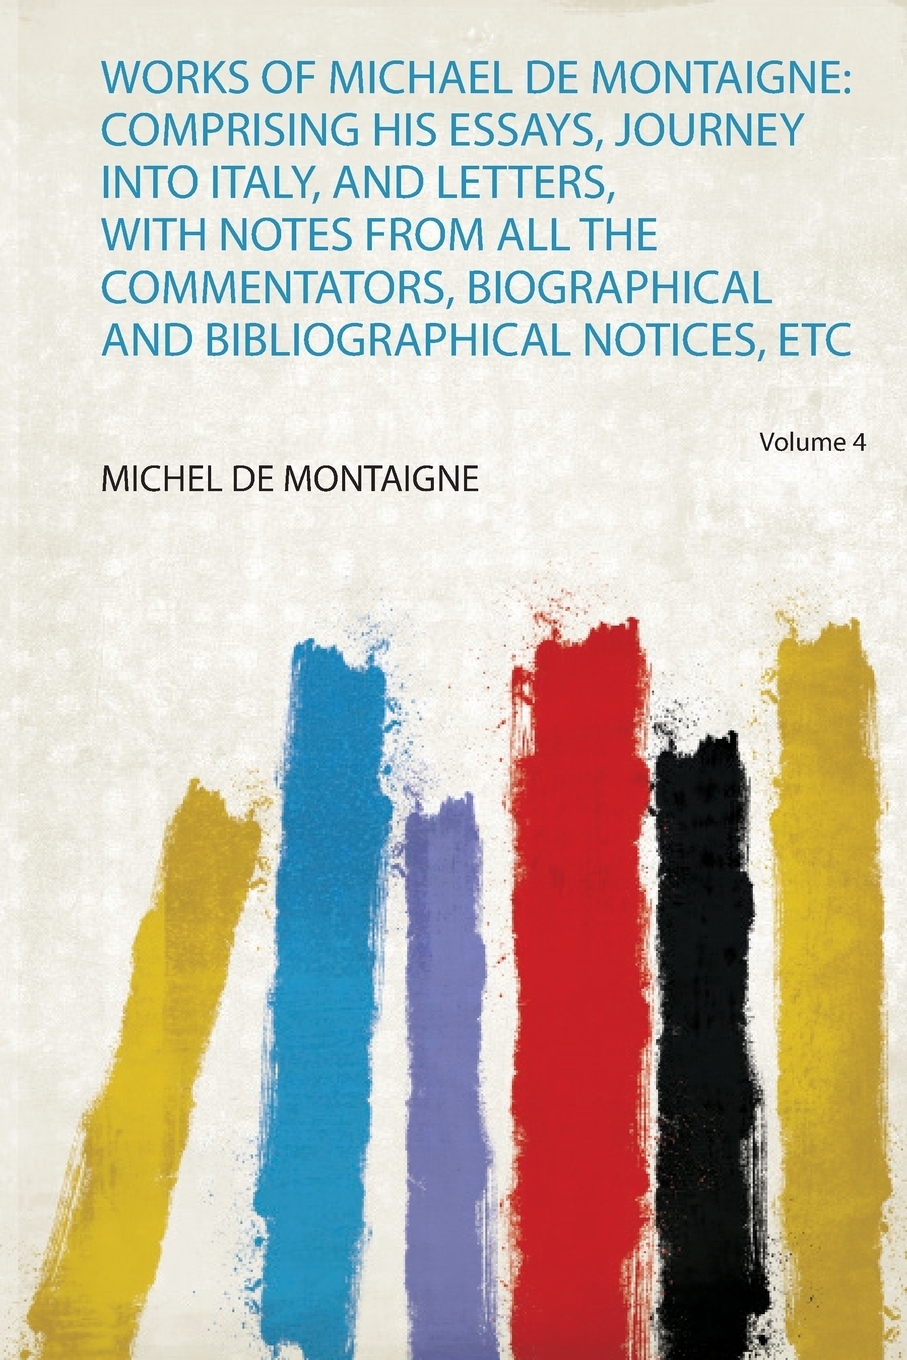 Works of Michael De Montaigne. Comprising His Essays, Journey Into Italy, and Letters, With Notes from All the Commentators, Biographical and Bibliographical Notices, Etc